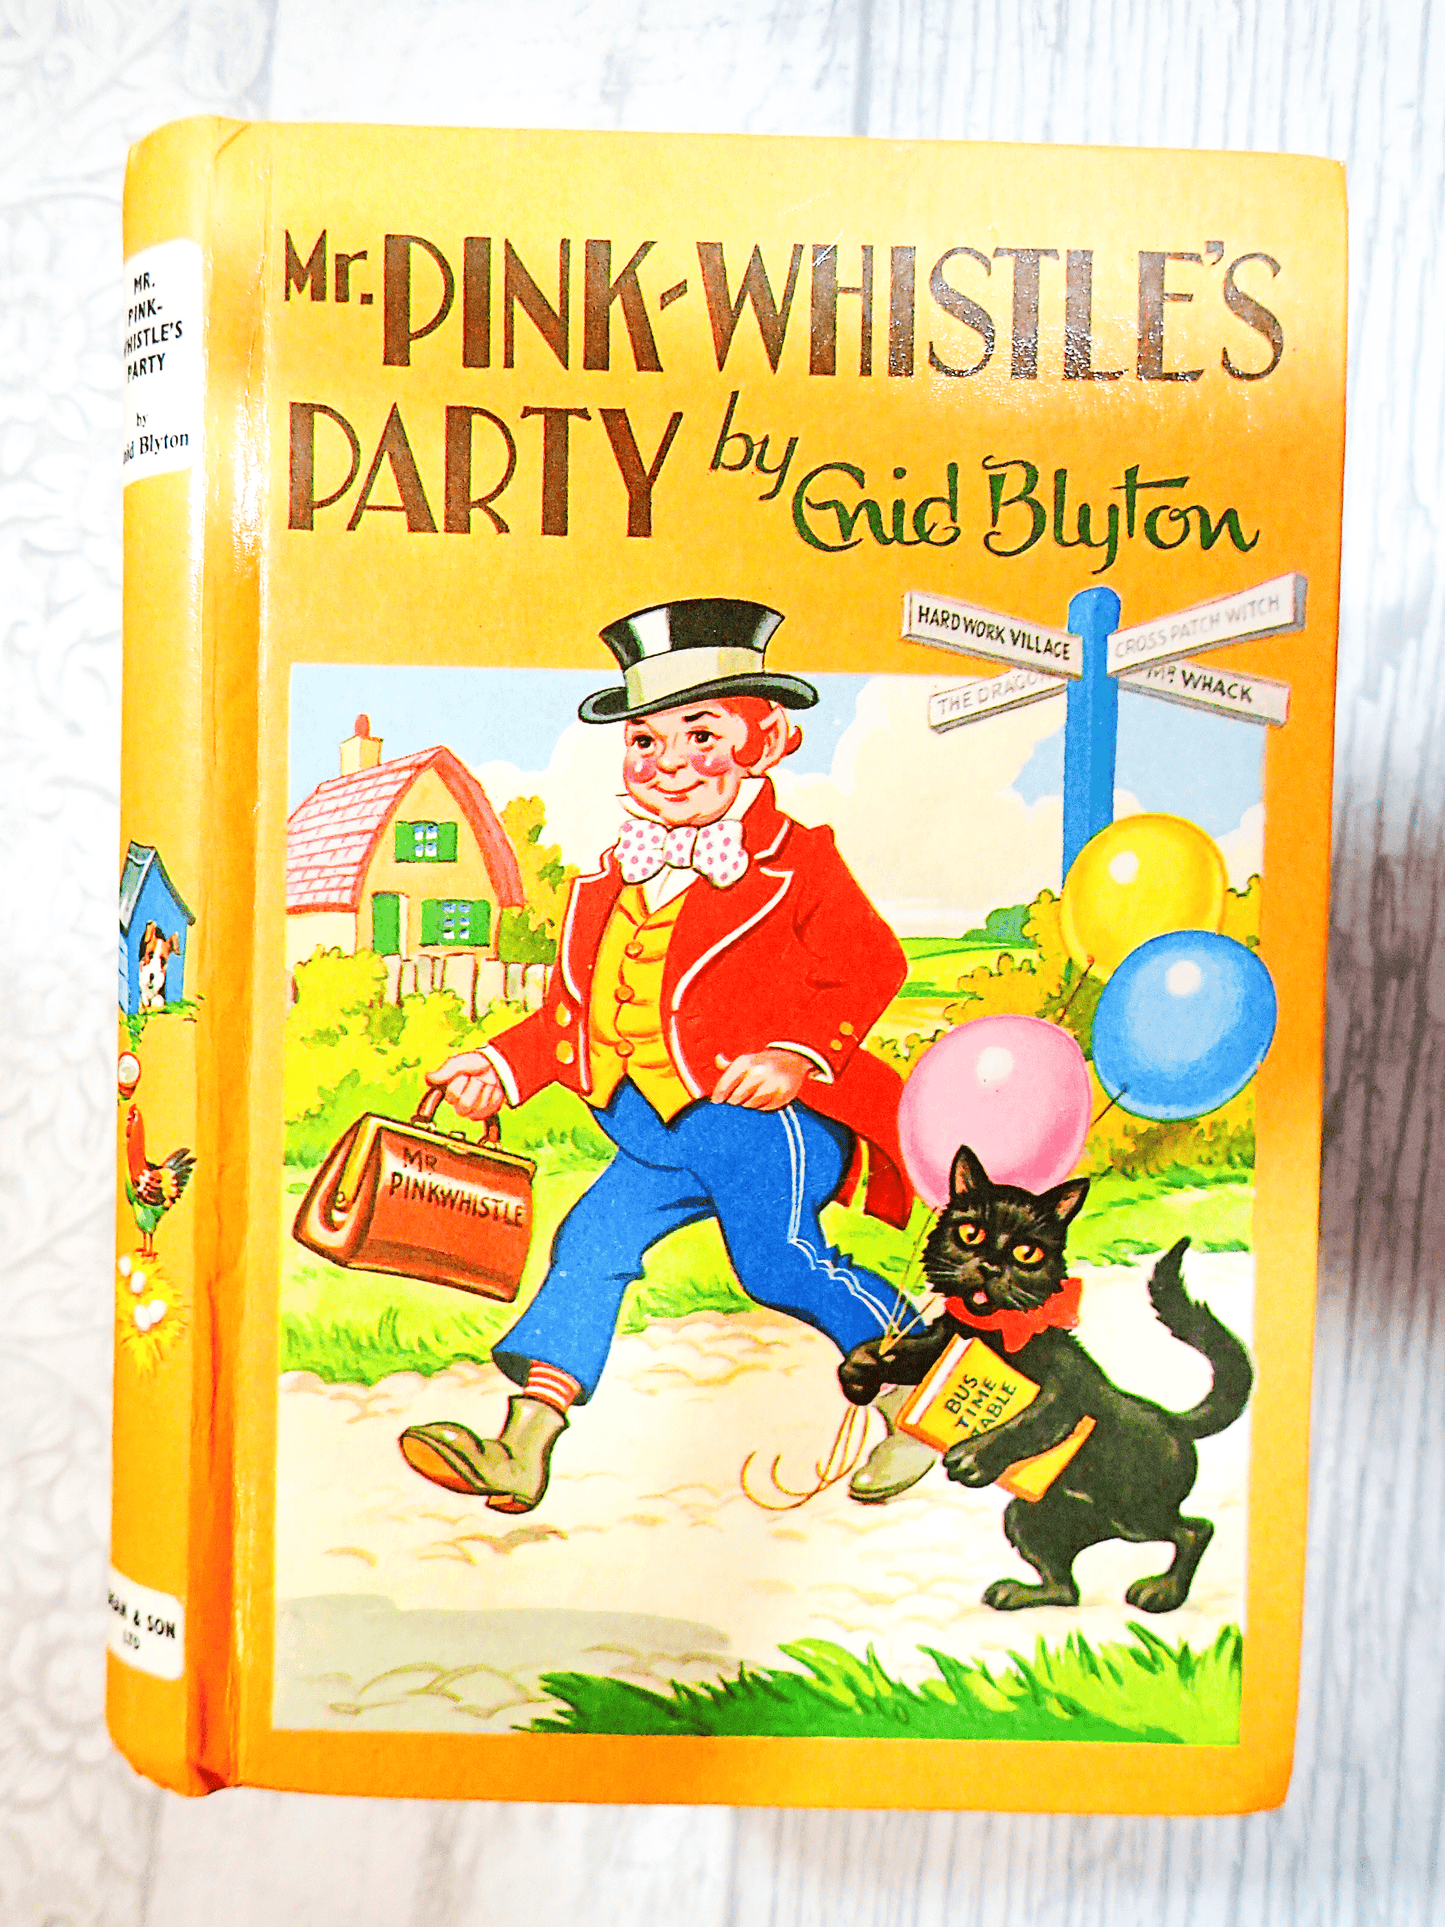 Front Cover of Mr Pinkwhistles Party by Enid Blyton Vintage Children's book 1970's Hardback Bedtime Stories showing Mr Pinkwhistle wearing a funny suit walking with his black cat against a light background.